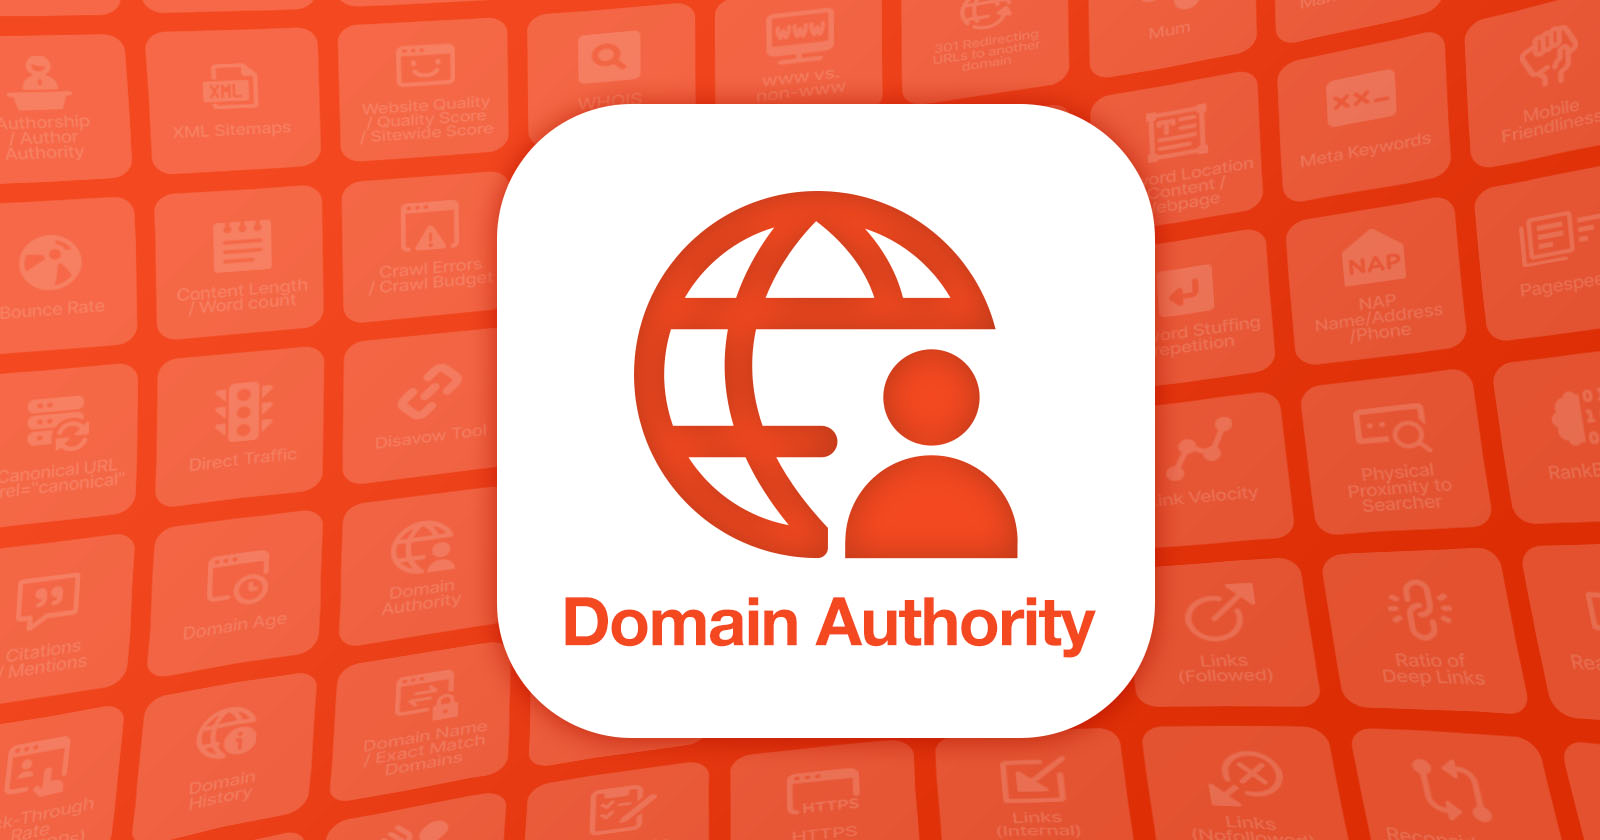 How to Check a Website Domain Authority